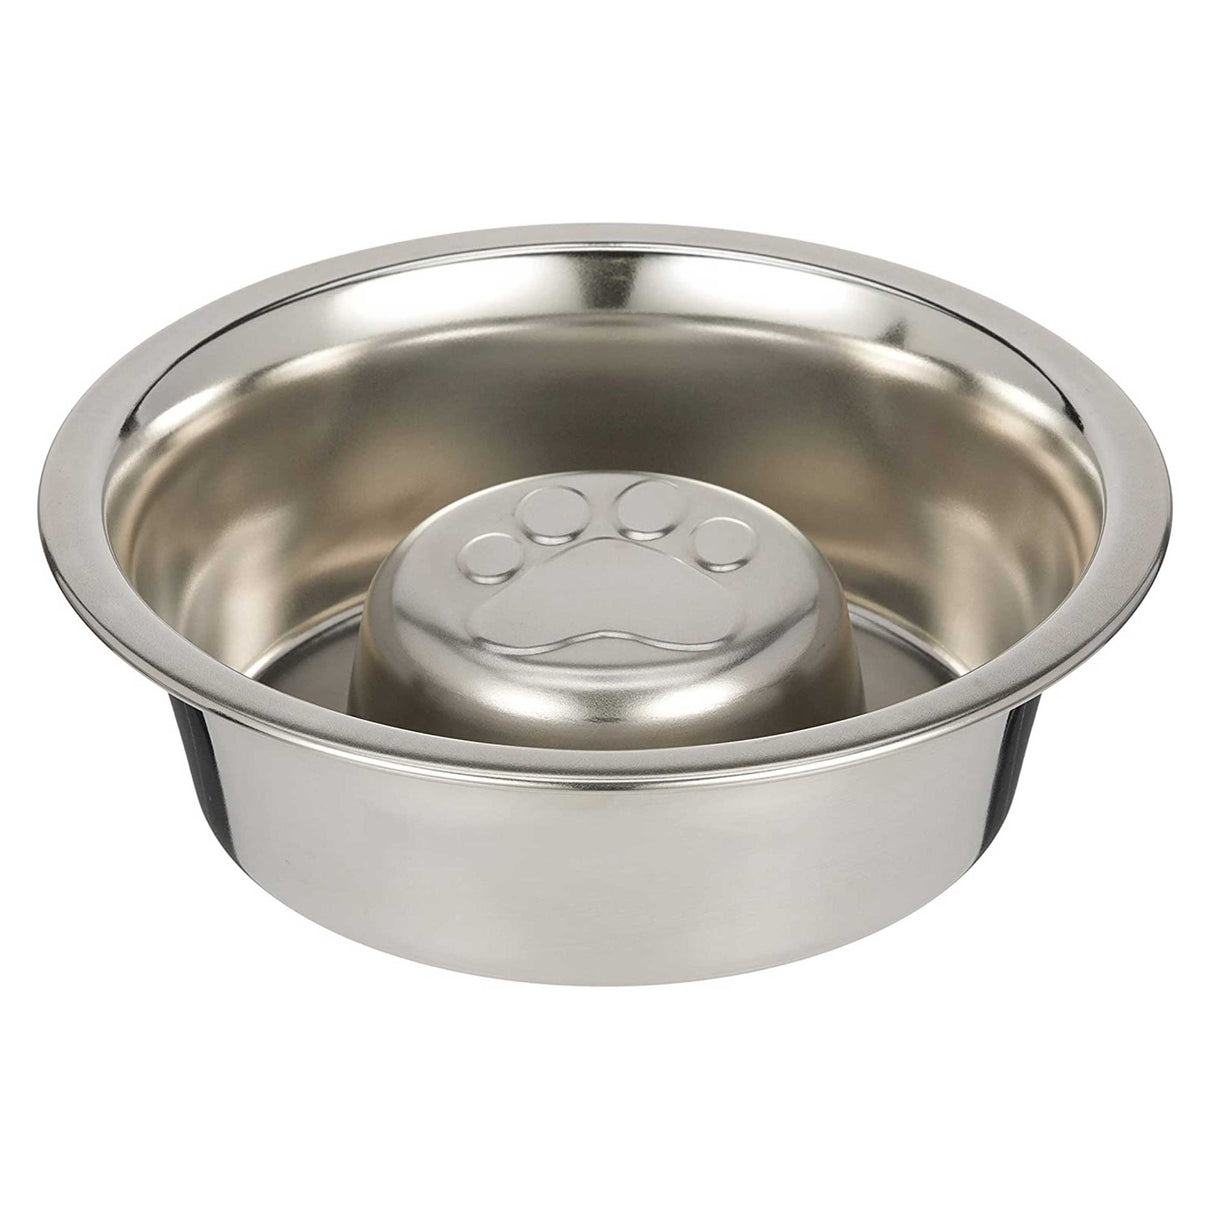 Medium Stainless Steel Slow Feed Replacement Bowl for Neater Feeder